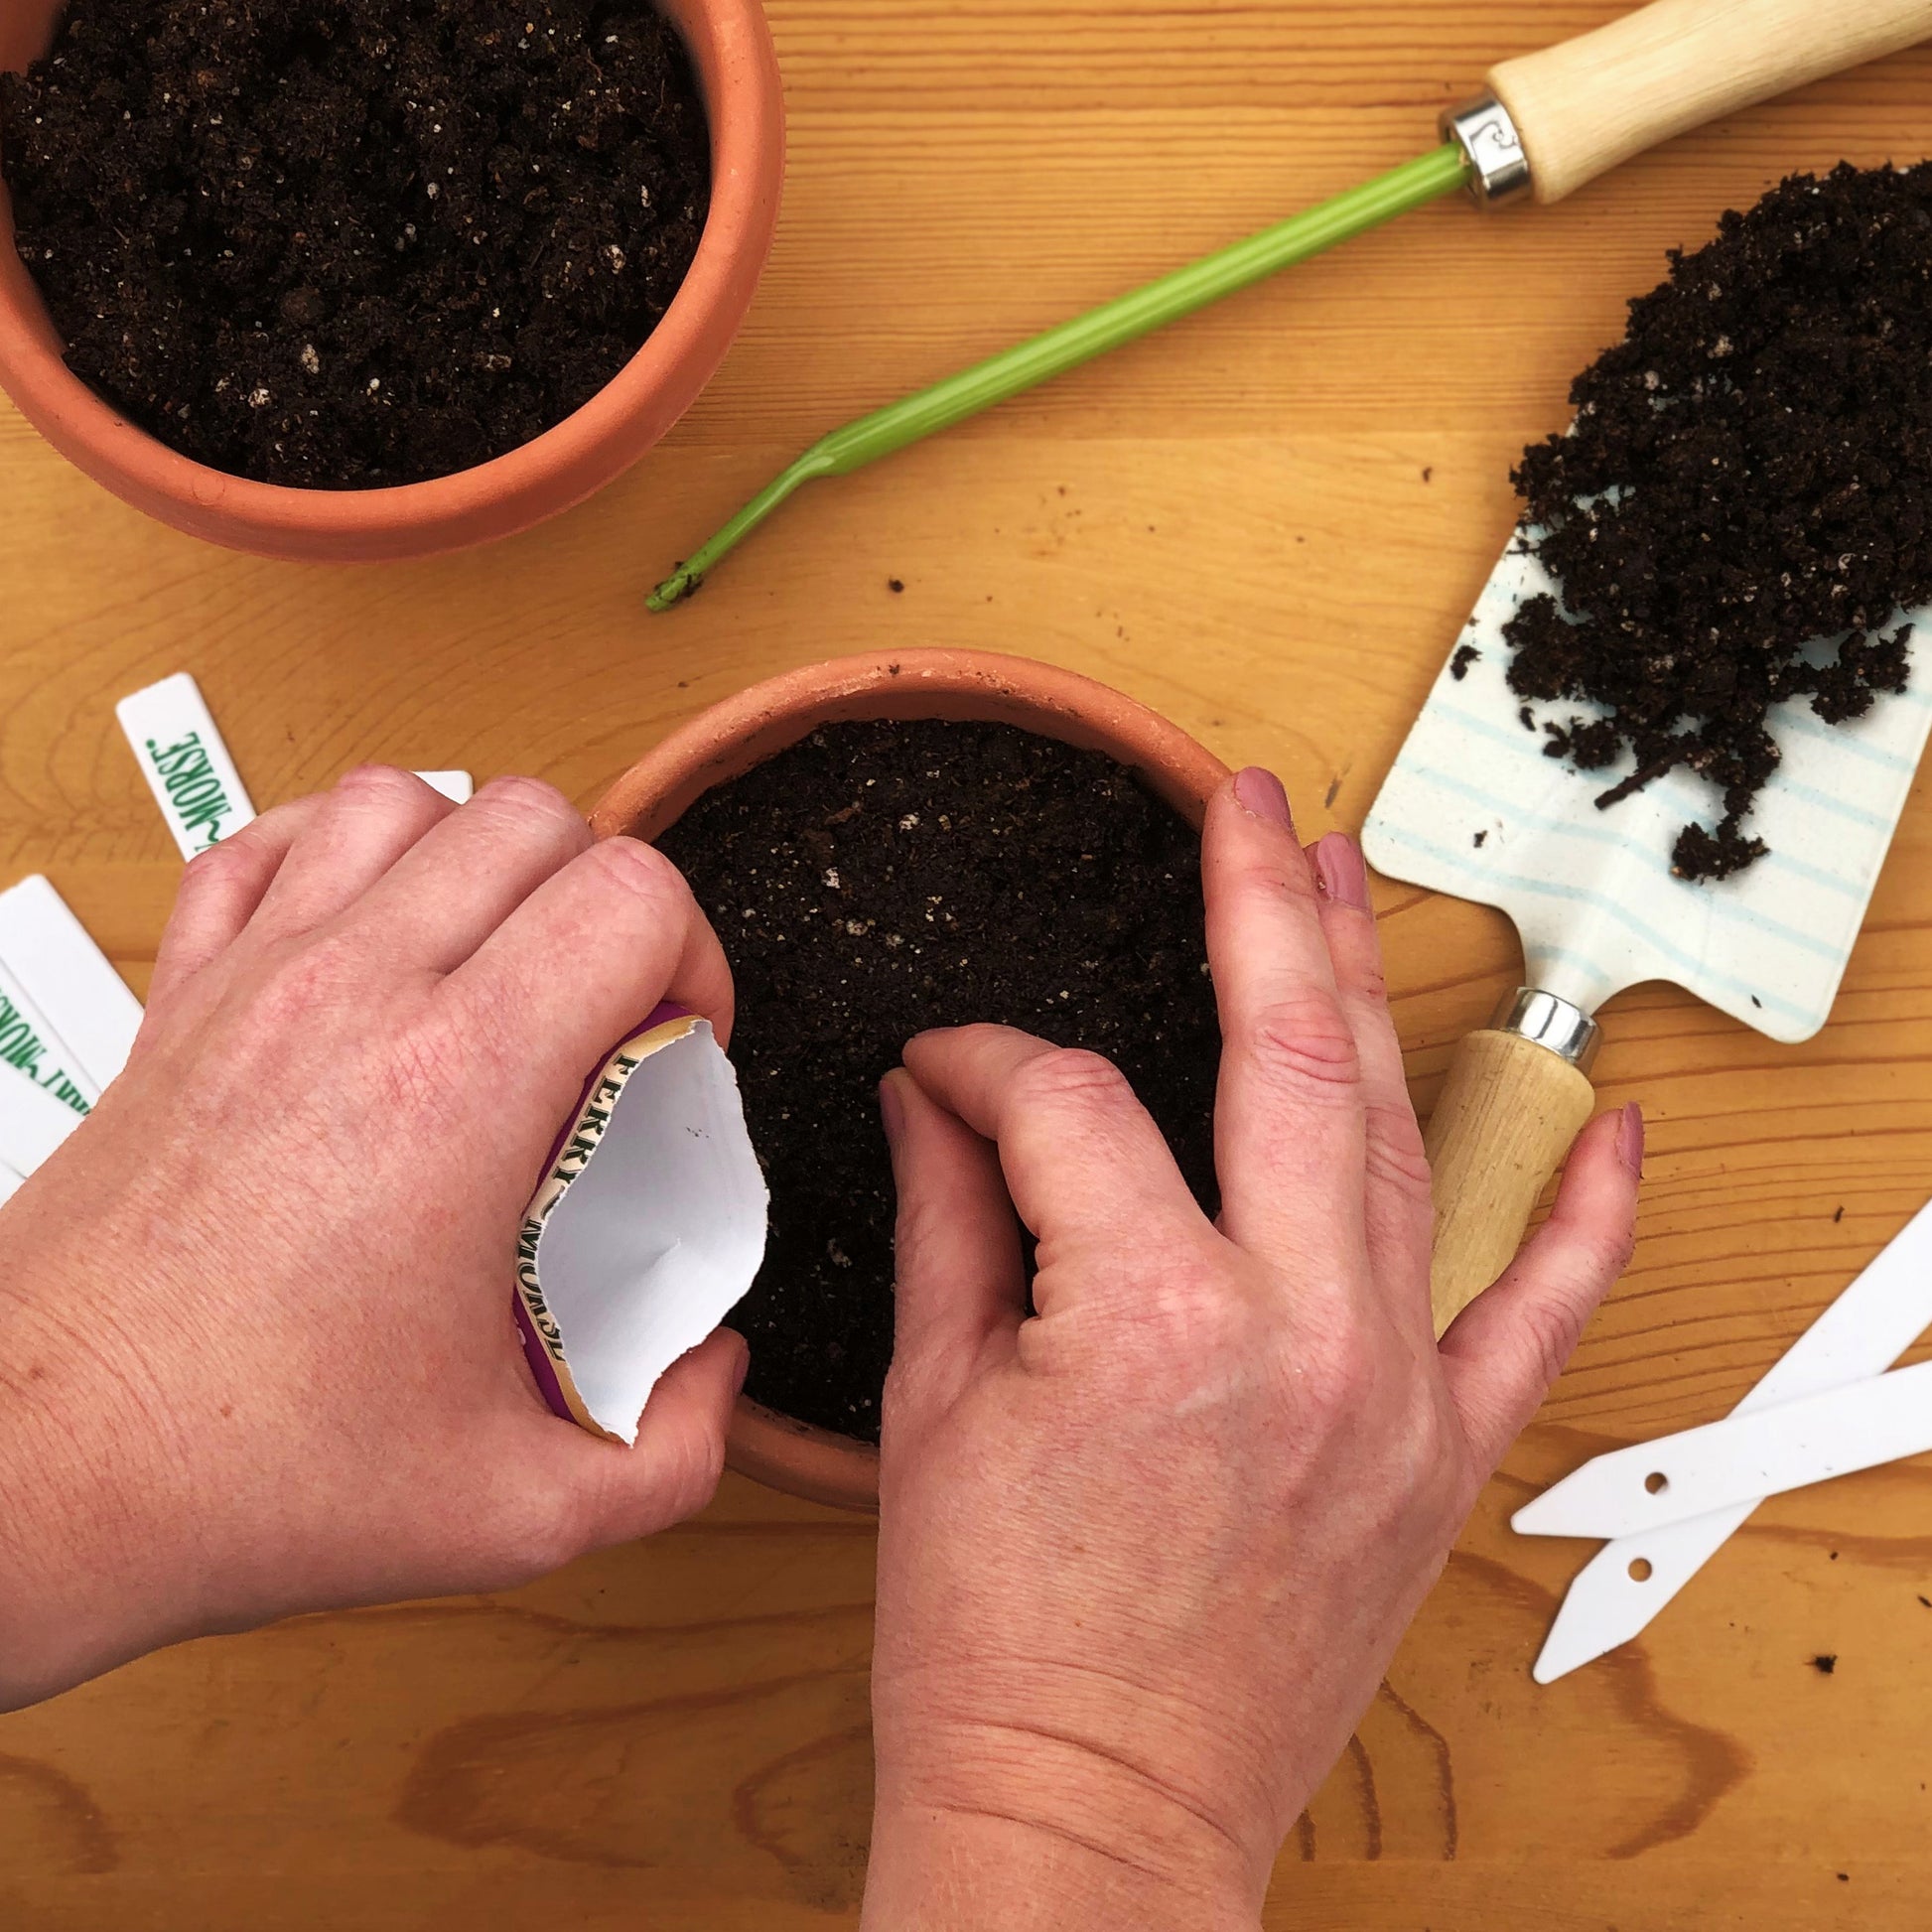 Sowing Heirloom Roquette Arugula Seeds into a 12"+ container filled with seed starting mix.